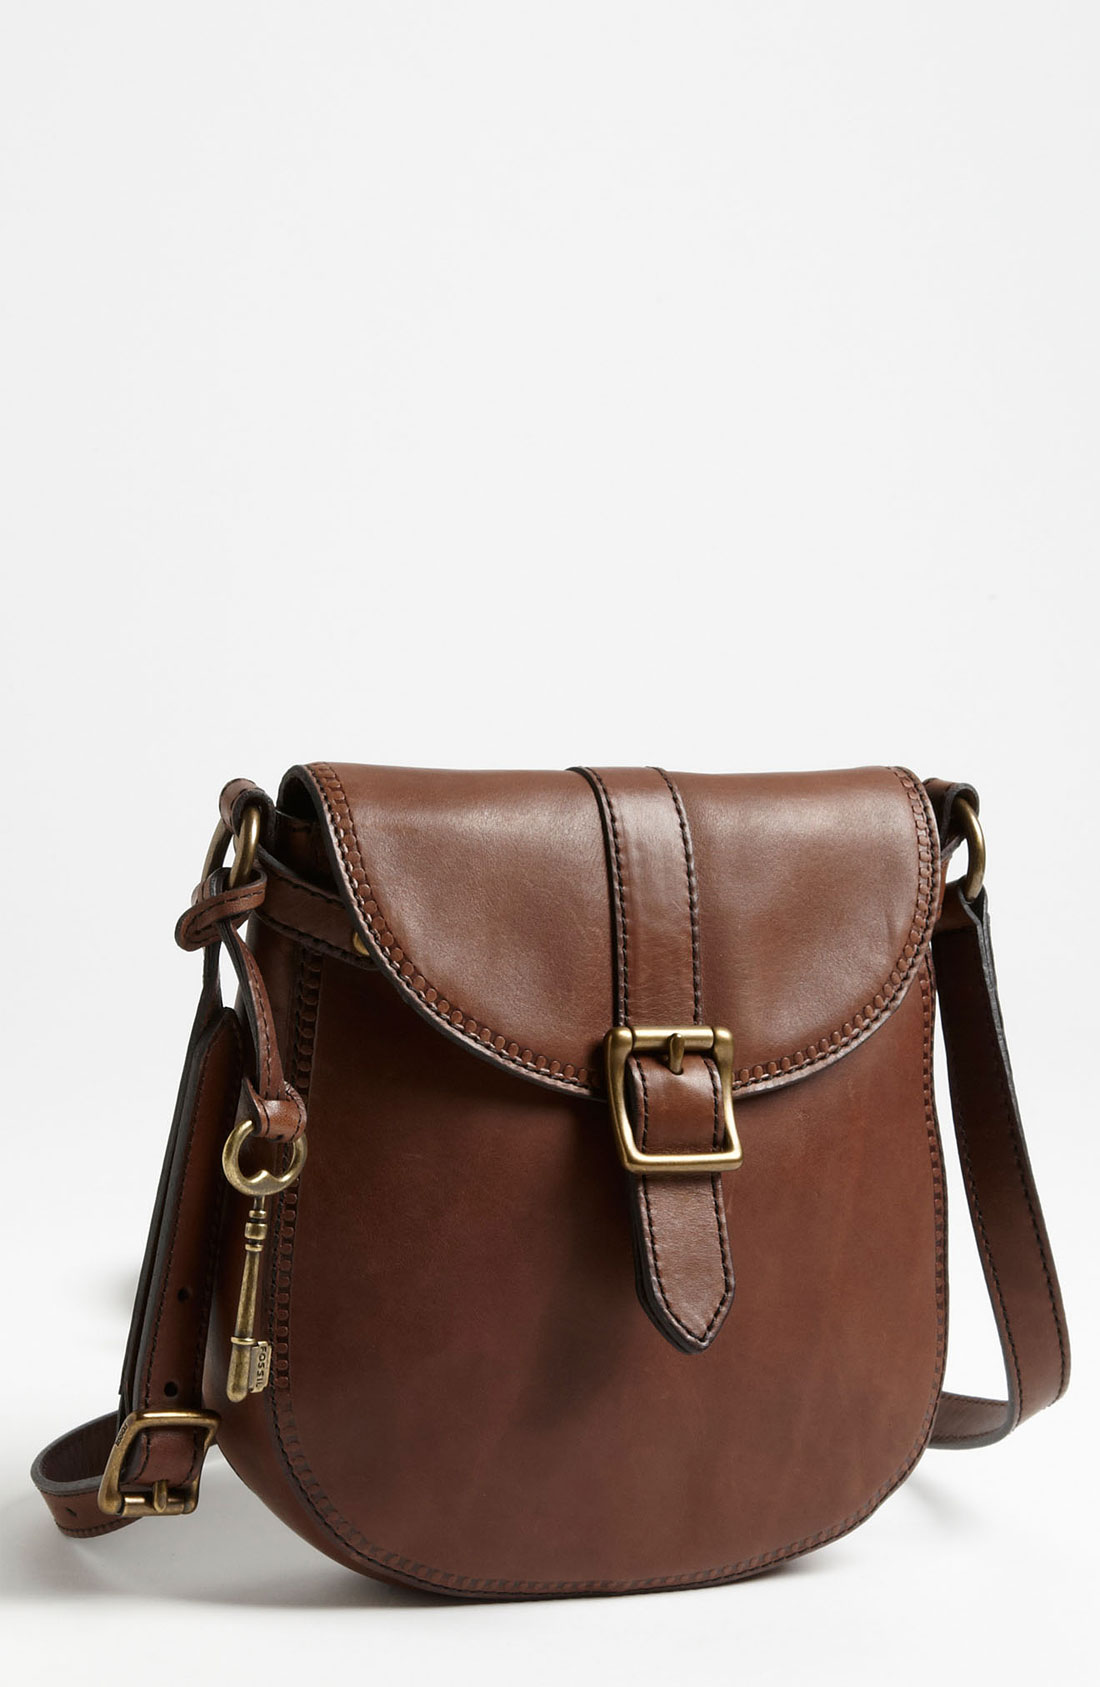 Bags Sale: Fossil Crossbody Bags Sale